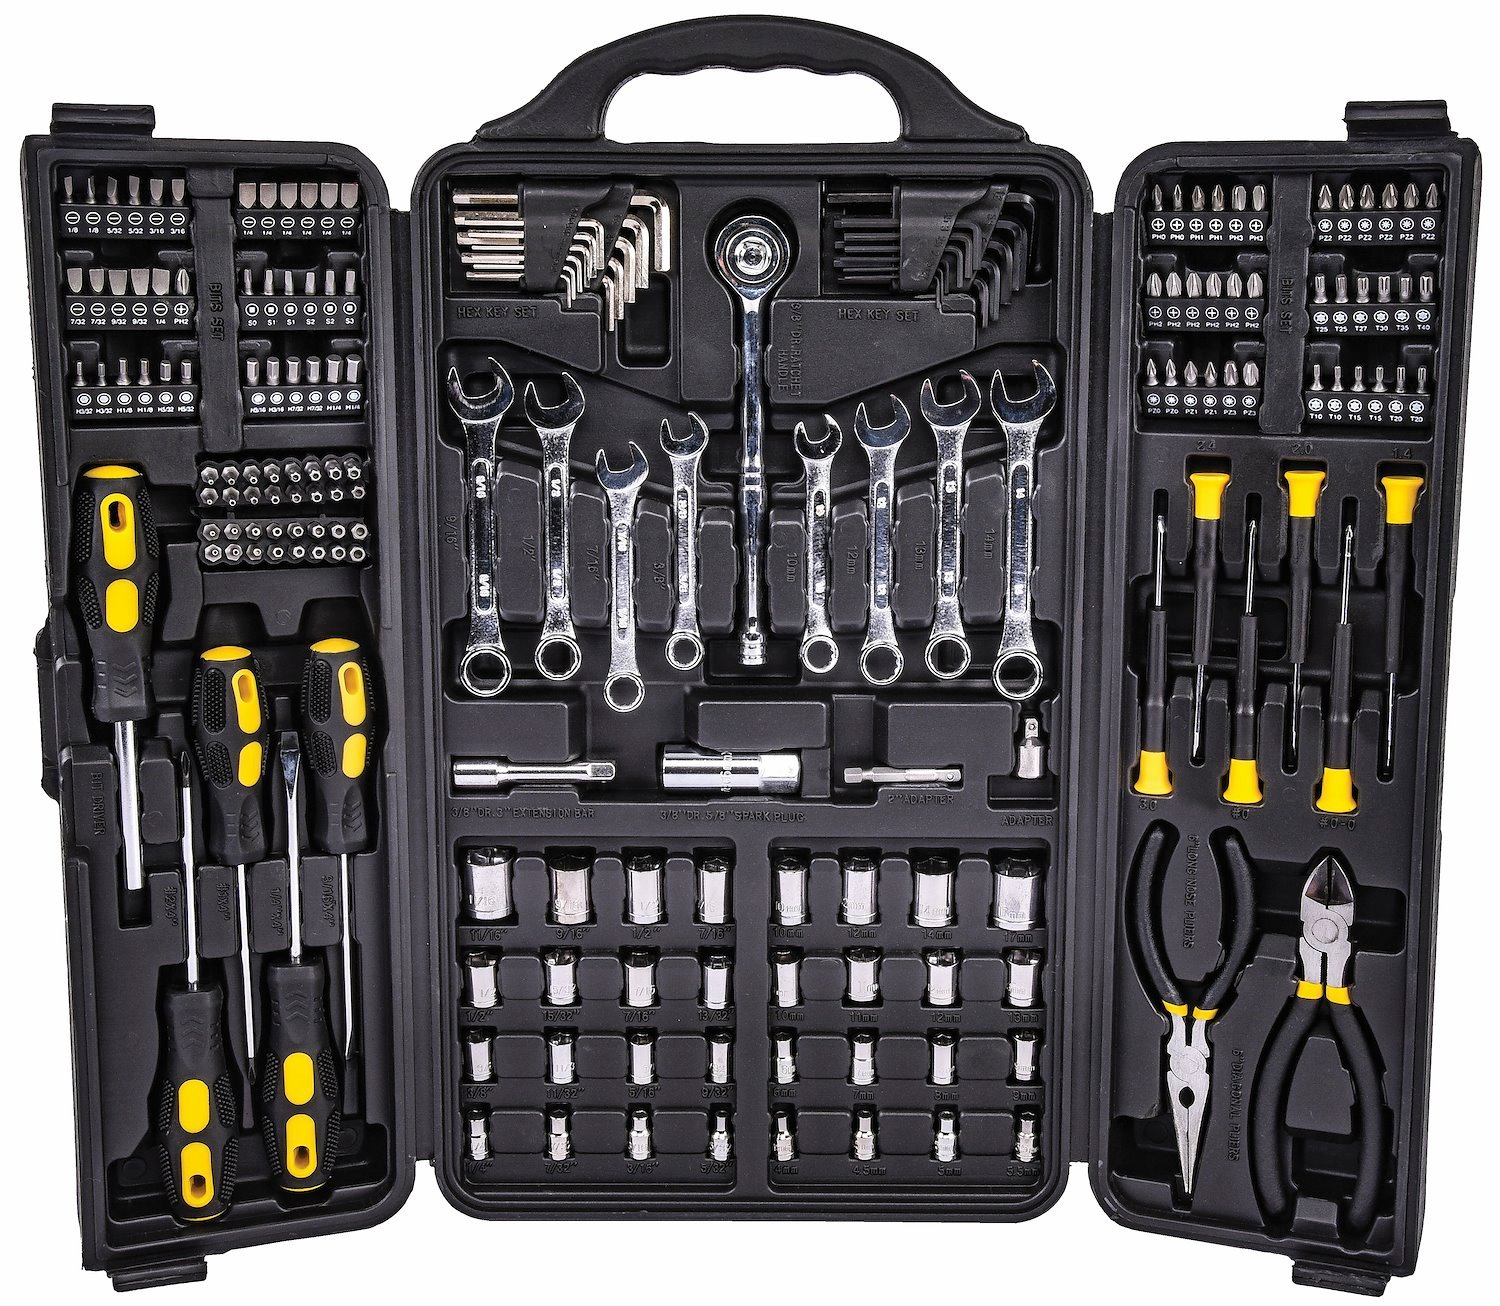 200-Piece Tool Set with Carry Case